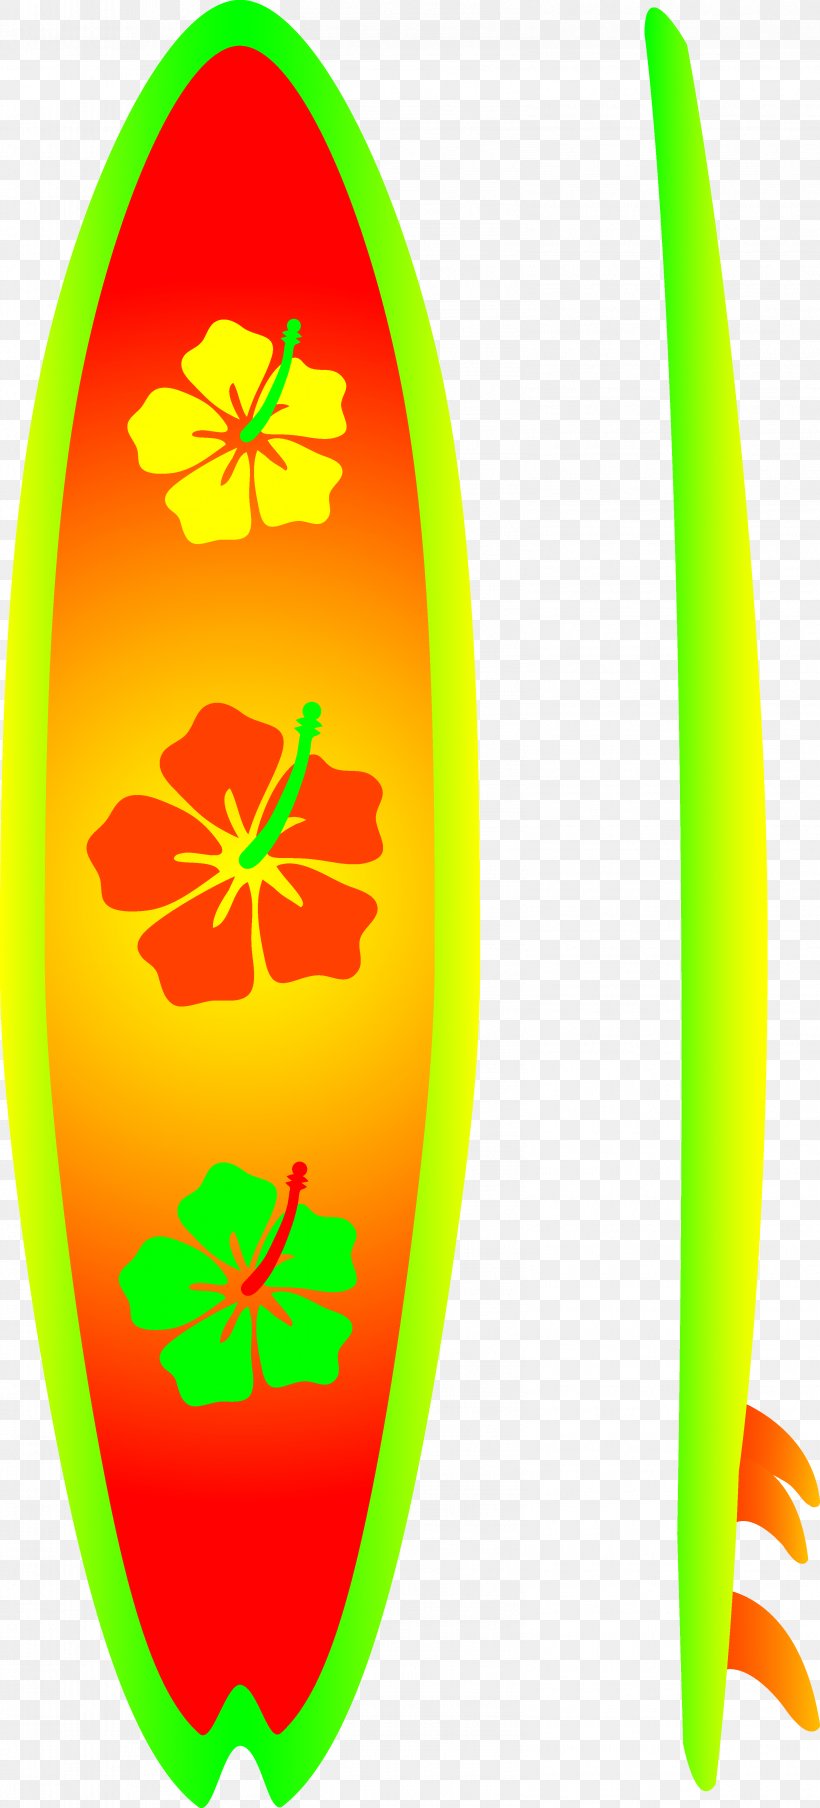 Surfing Surfboard Clip Art, PNG, 3192x7038px, Surfing, Blog, Free Content, Grass, Green Download Free